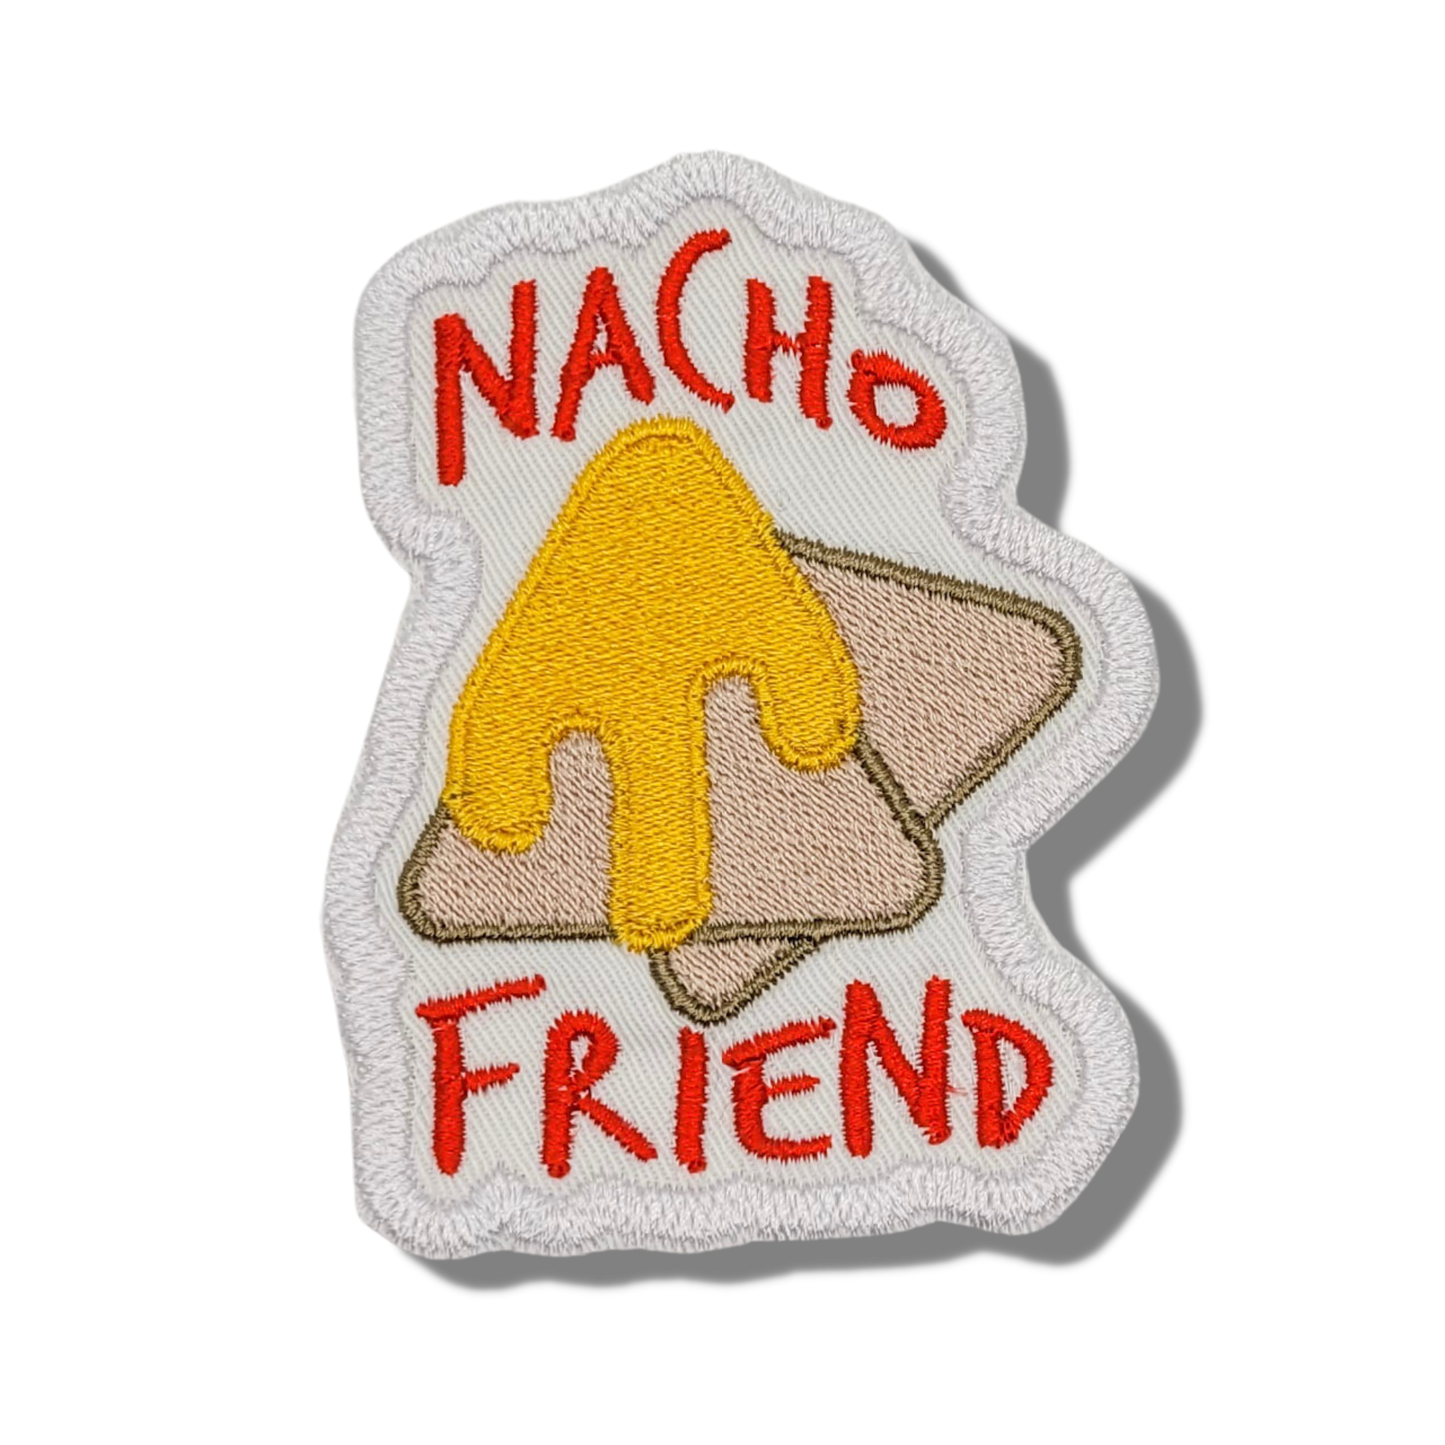 Nacho Friend Embroidered Patch